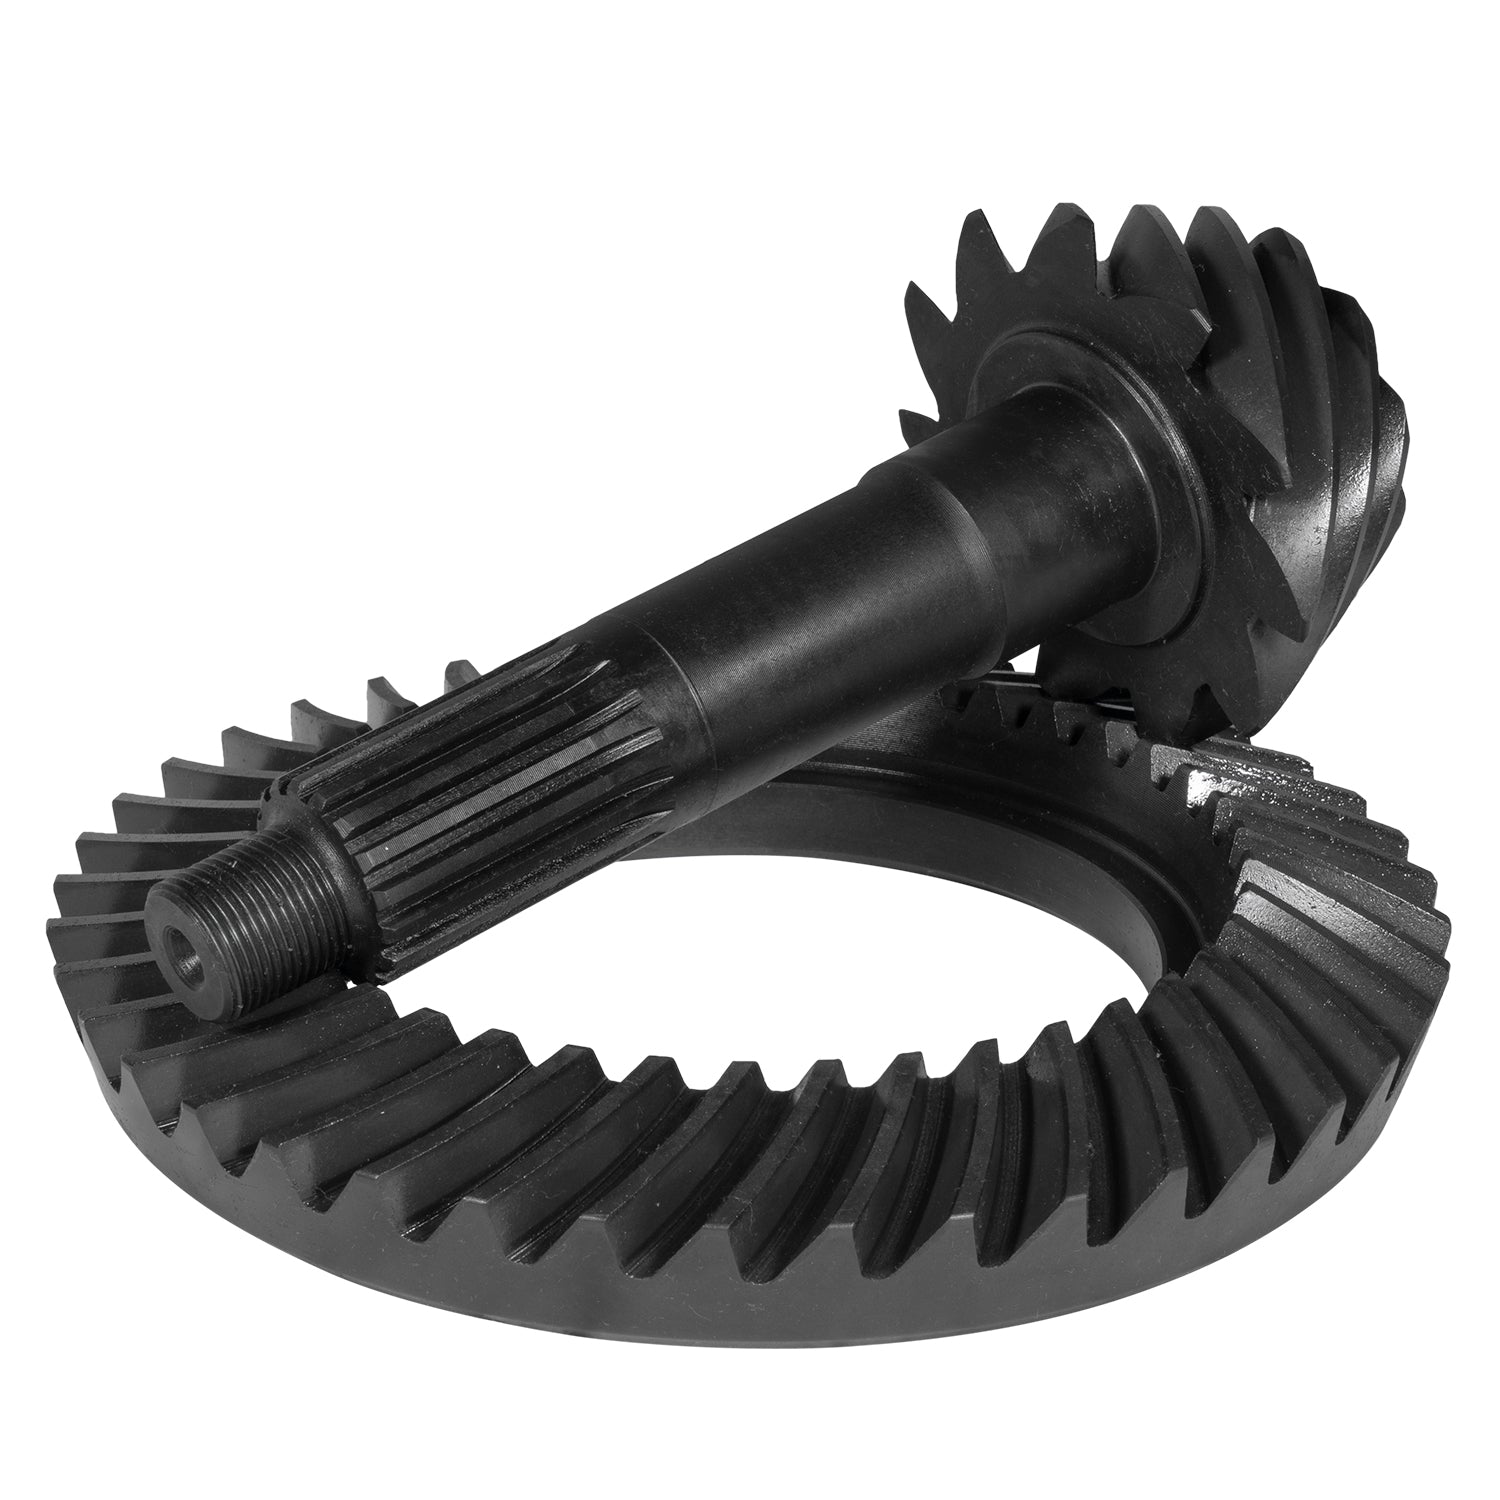 Yukon Gear Chevrolet Differential Ring and Pinion Kit - Rear YGK2368